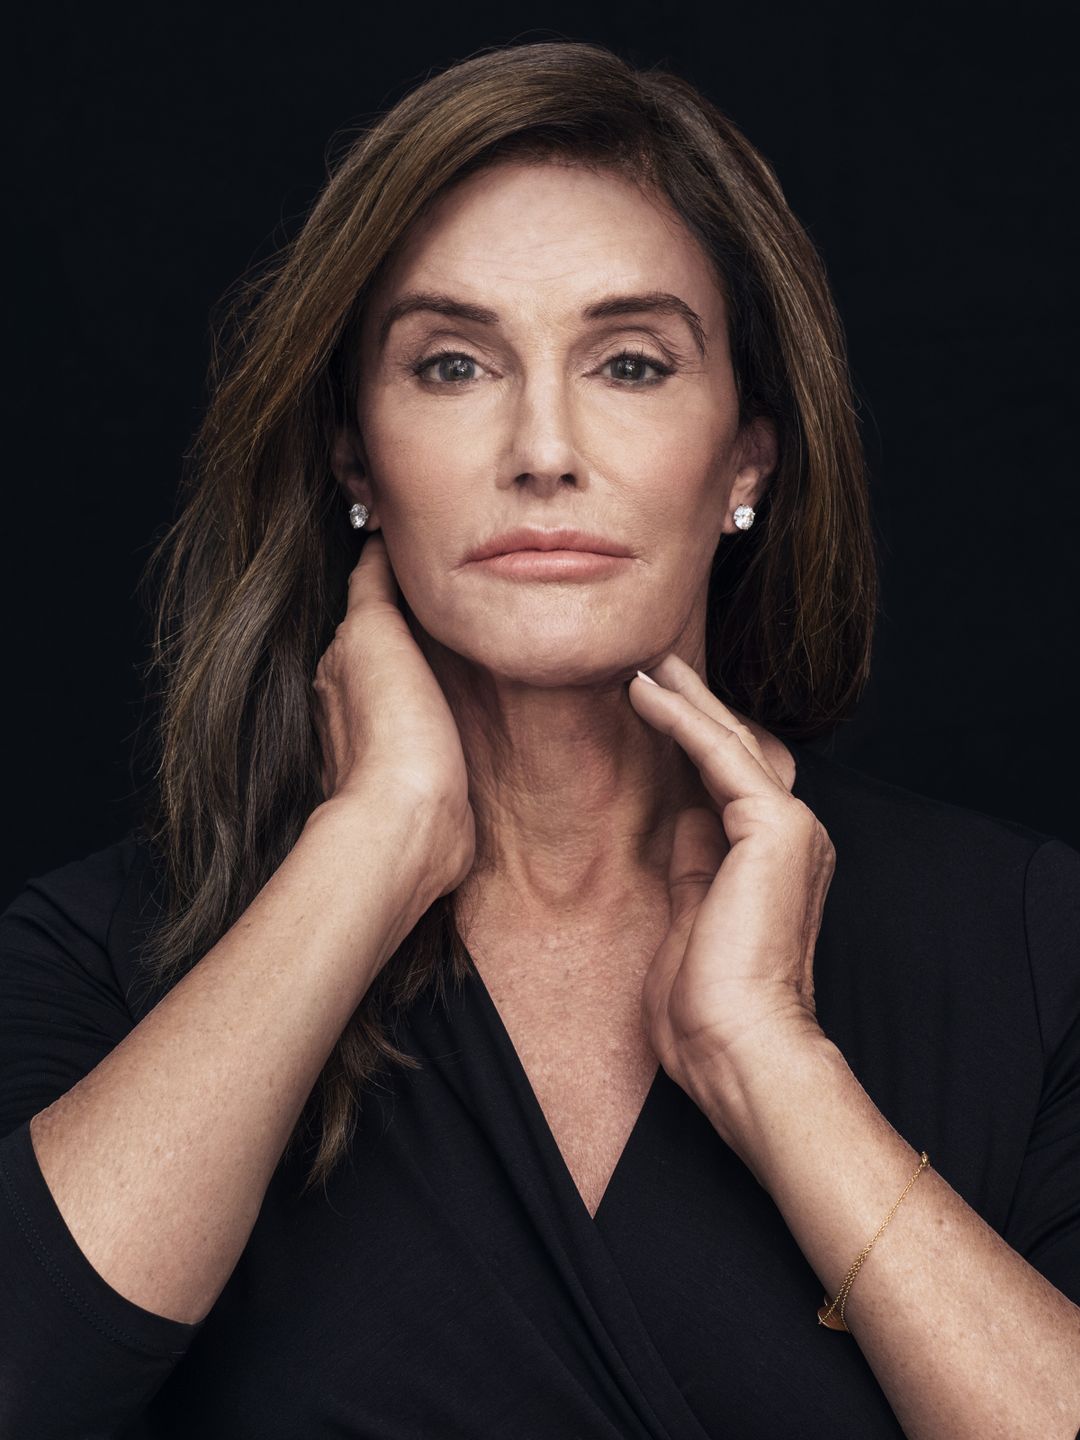 Caitlyn Jenner unphotoshopped pictures